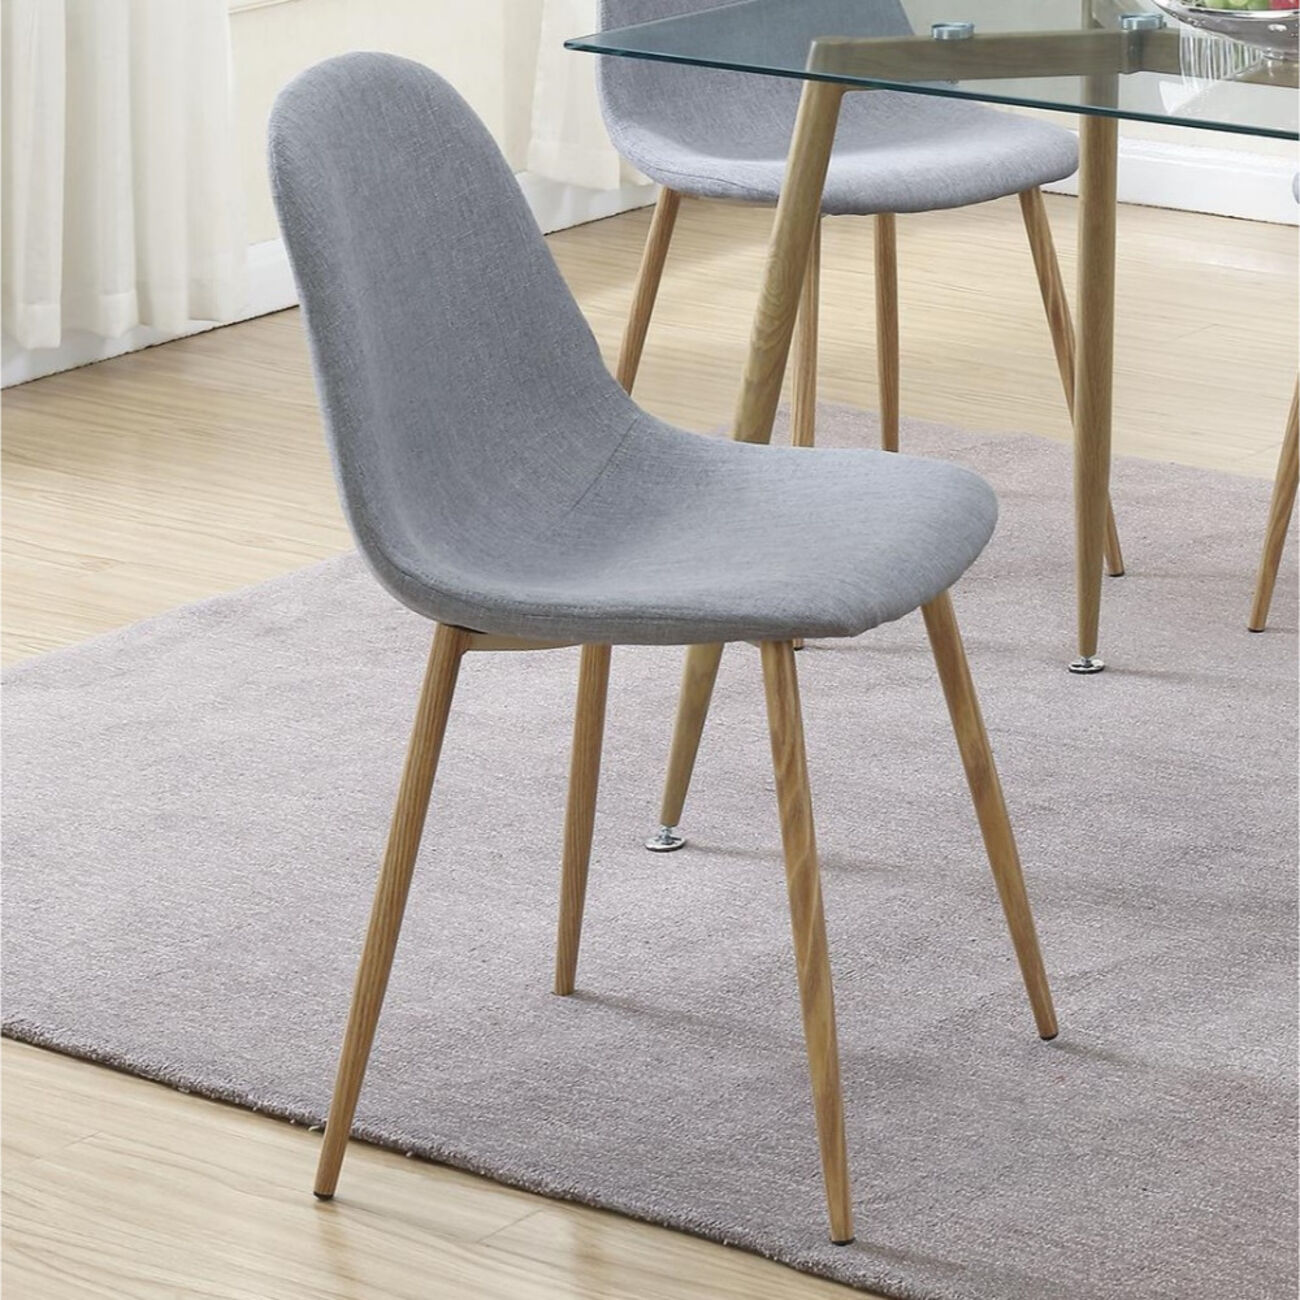 Metal Frame Dining Chair With Petal-Like Seats  Set Of 4 Gray And Brown